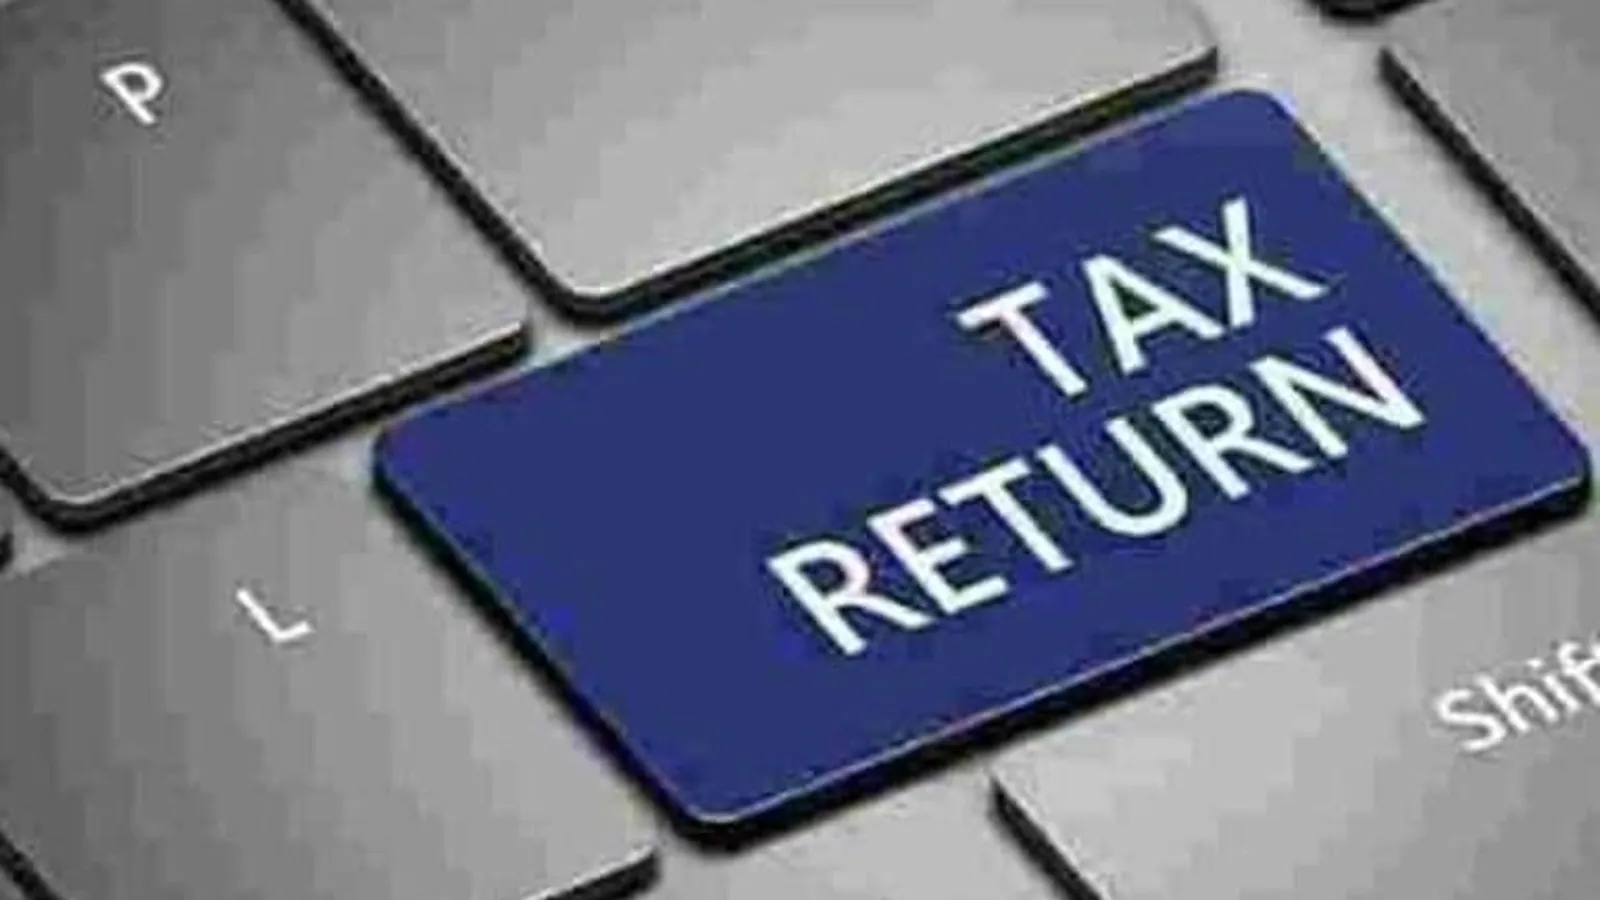 Income Tax Return: Here’s how you can check your ITR refund status online